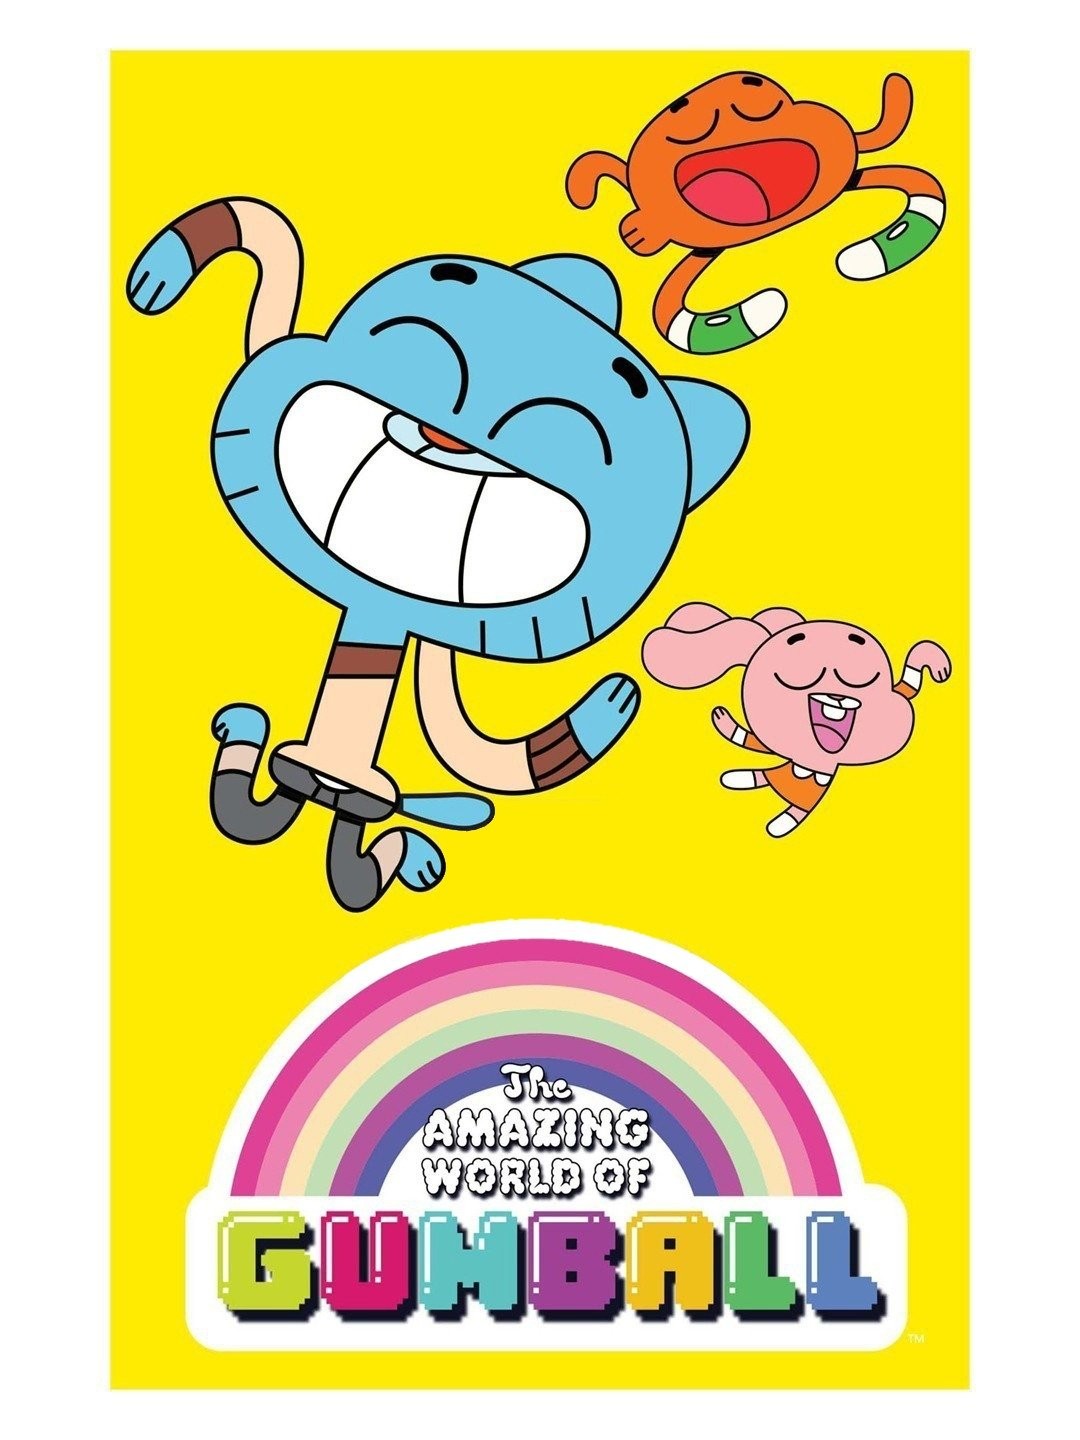 Gumball watterson with tyler, the creator